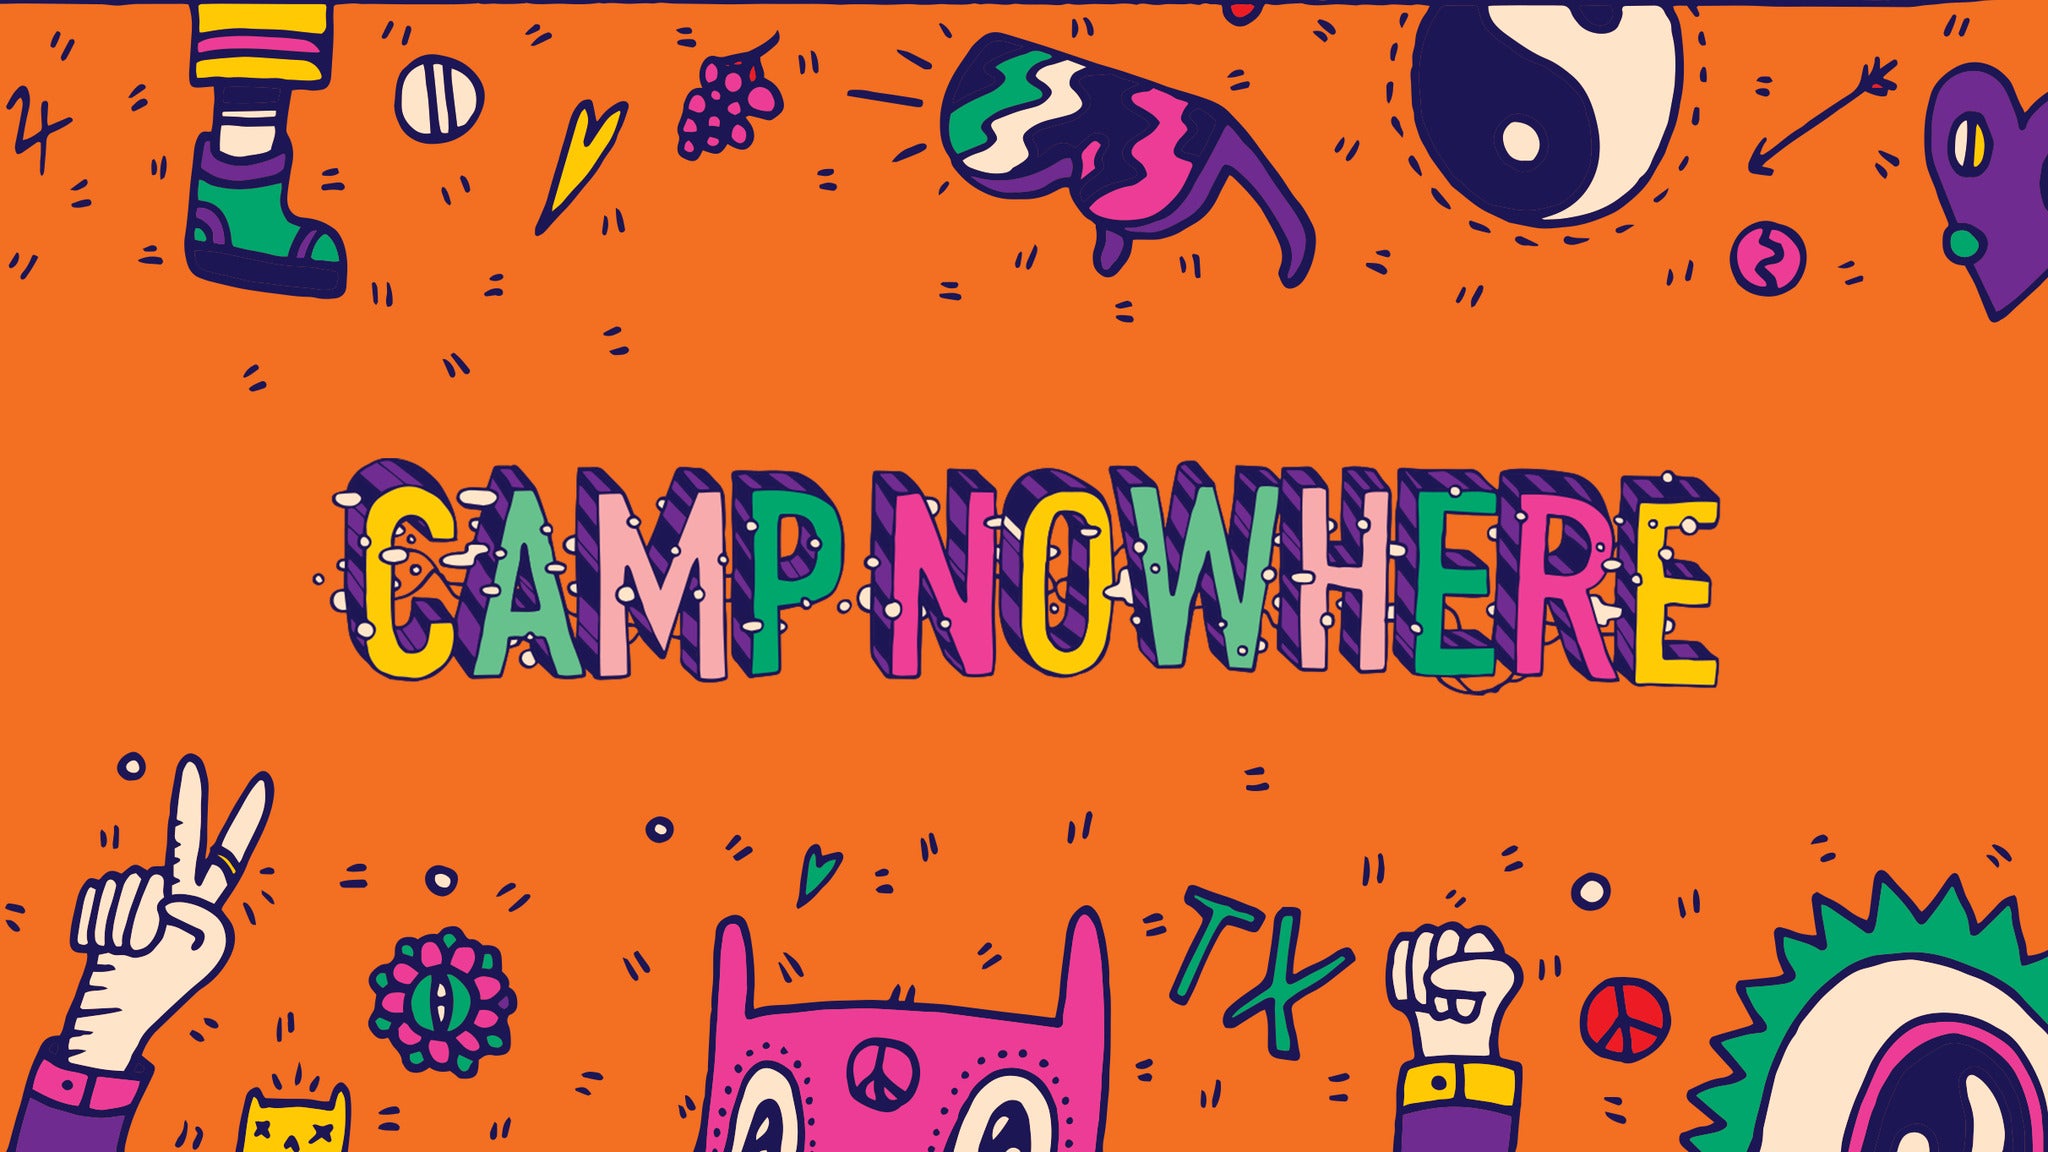 Camp Nowhere 2020 in Dallas promo photo for Loyalty presale offer code